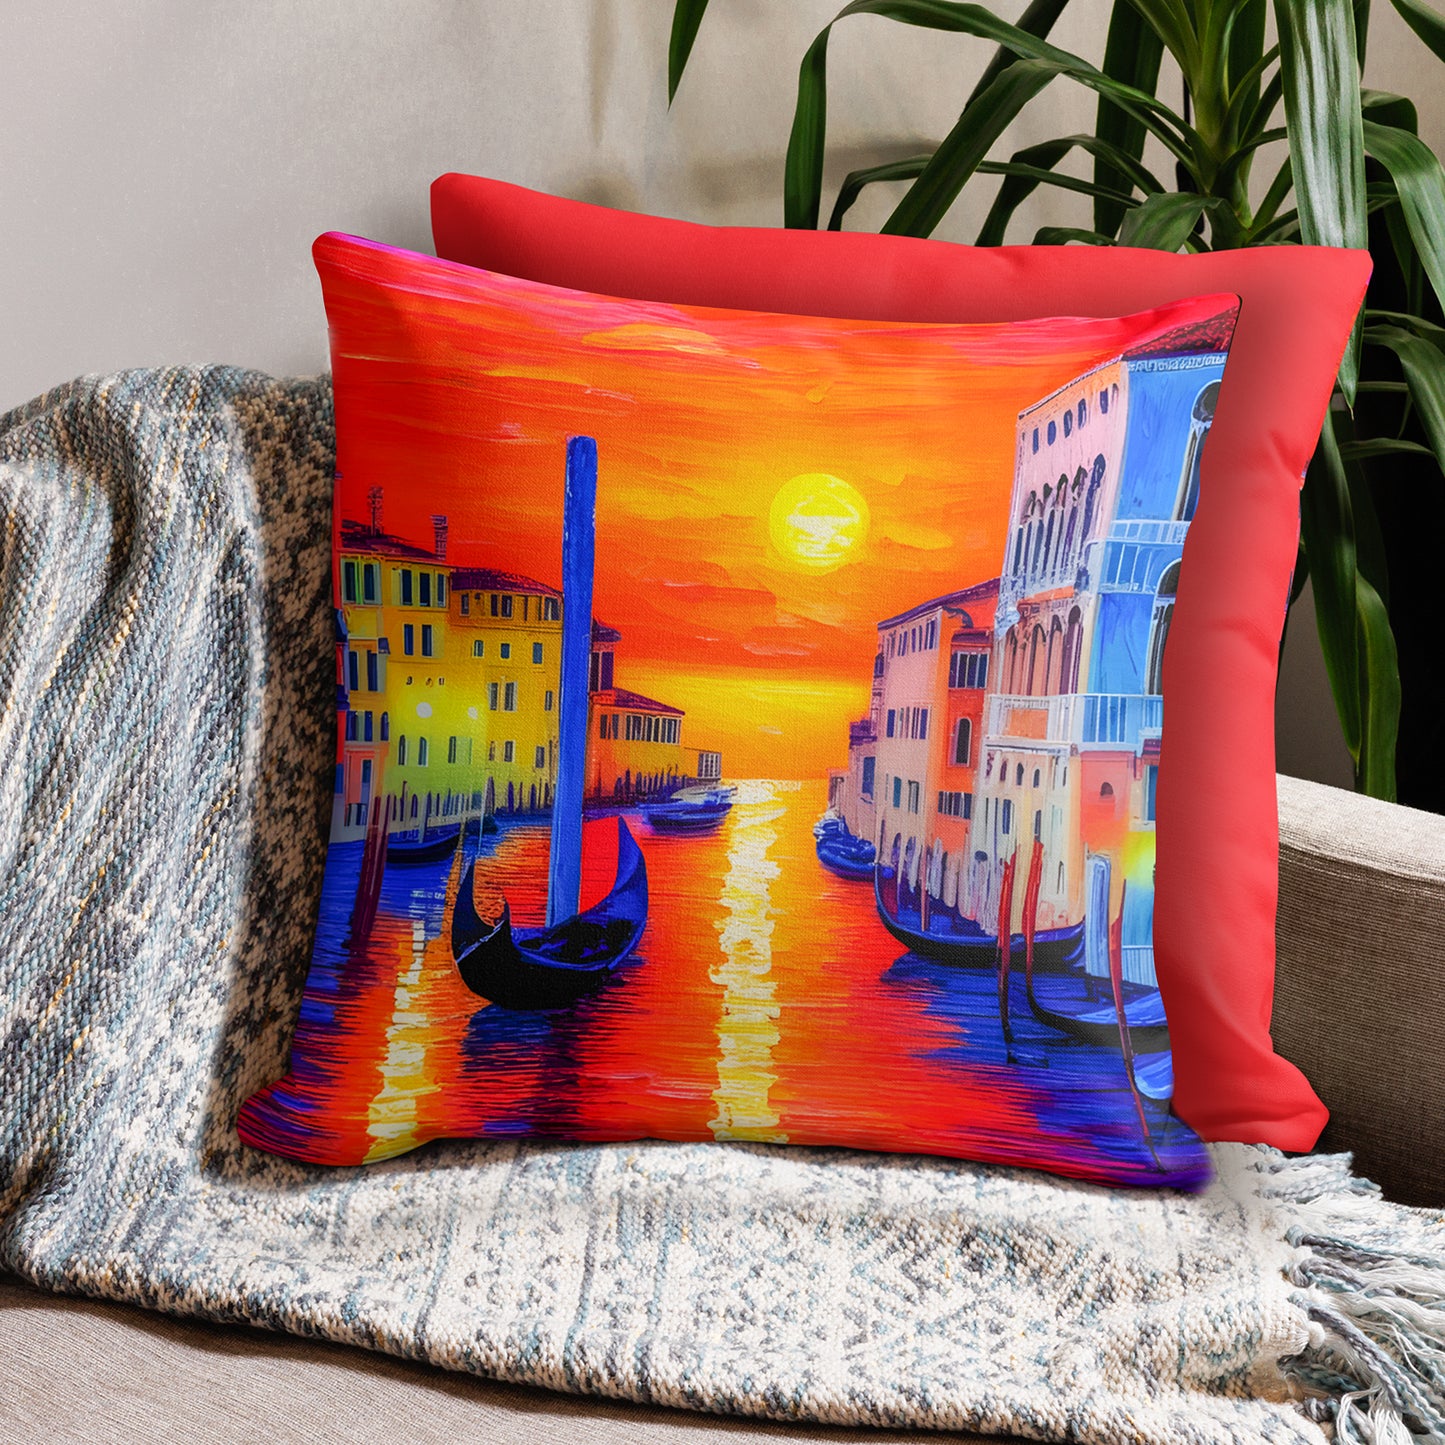 Premium Throw Pillow - Venice | Add a pop of color and cozy texture to any space | Seepu